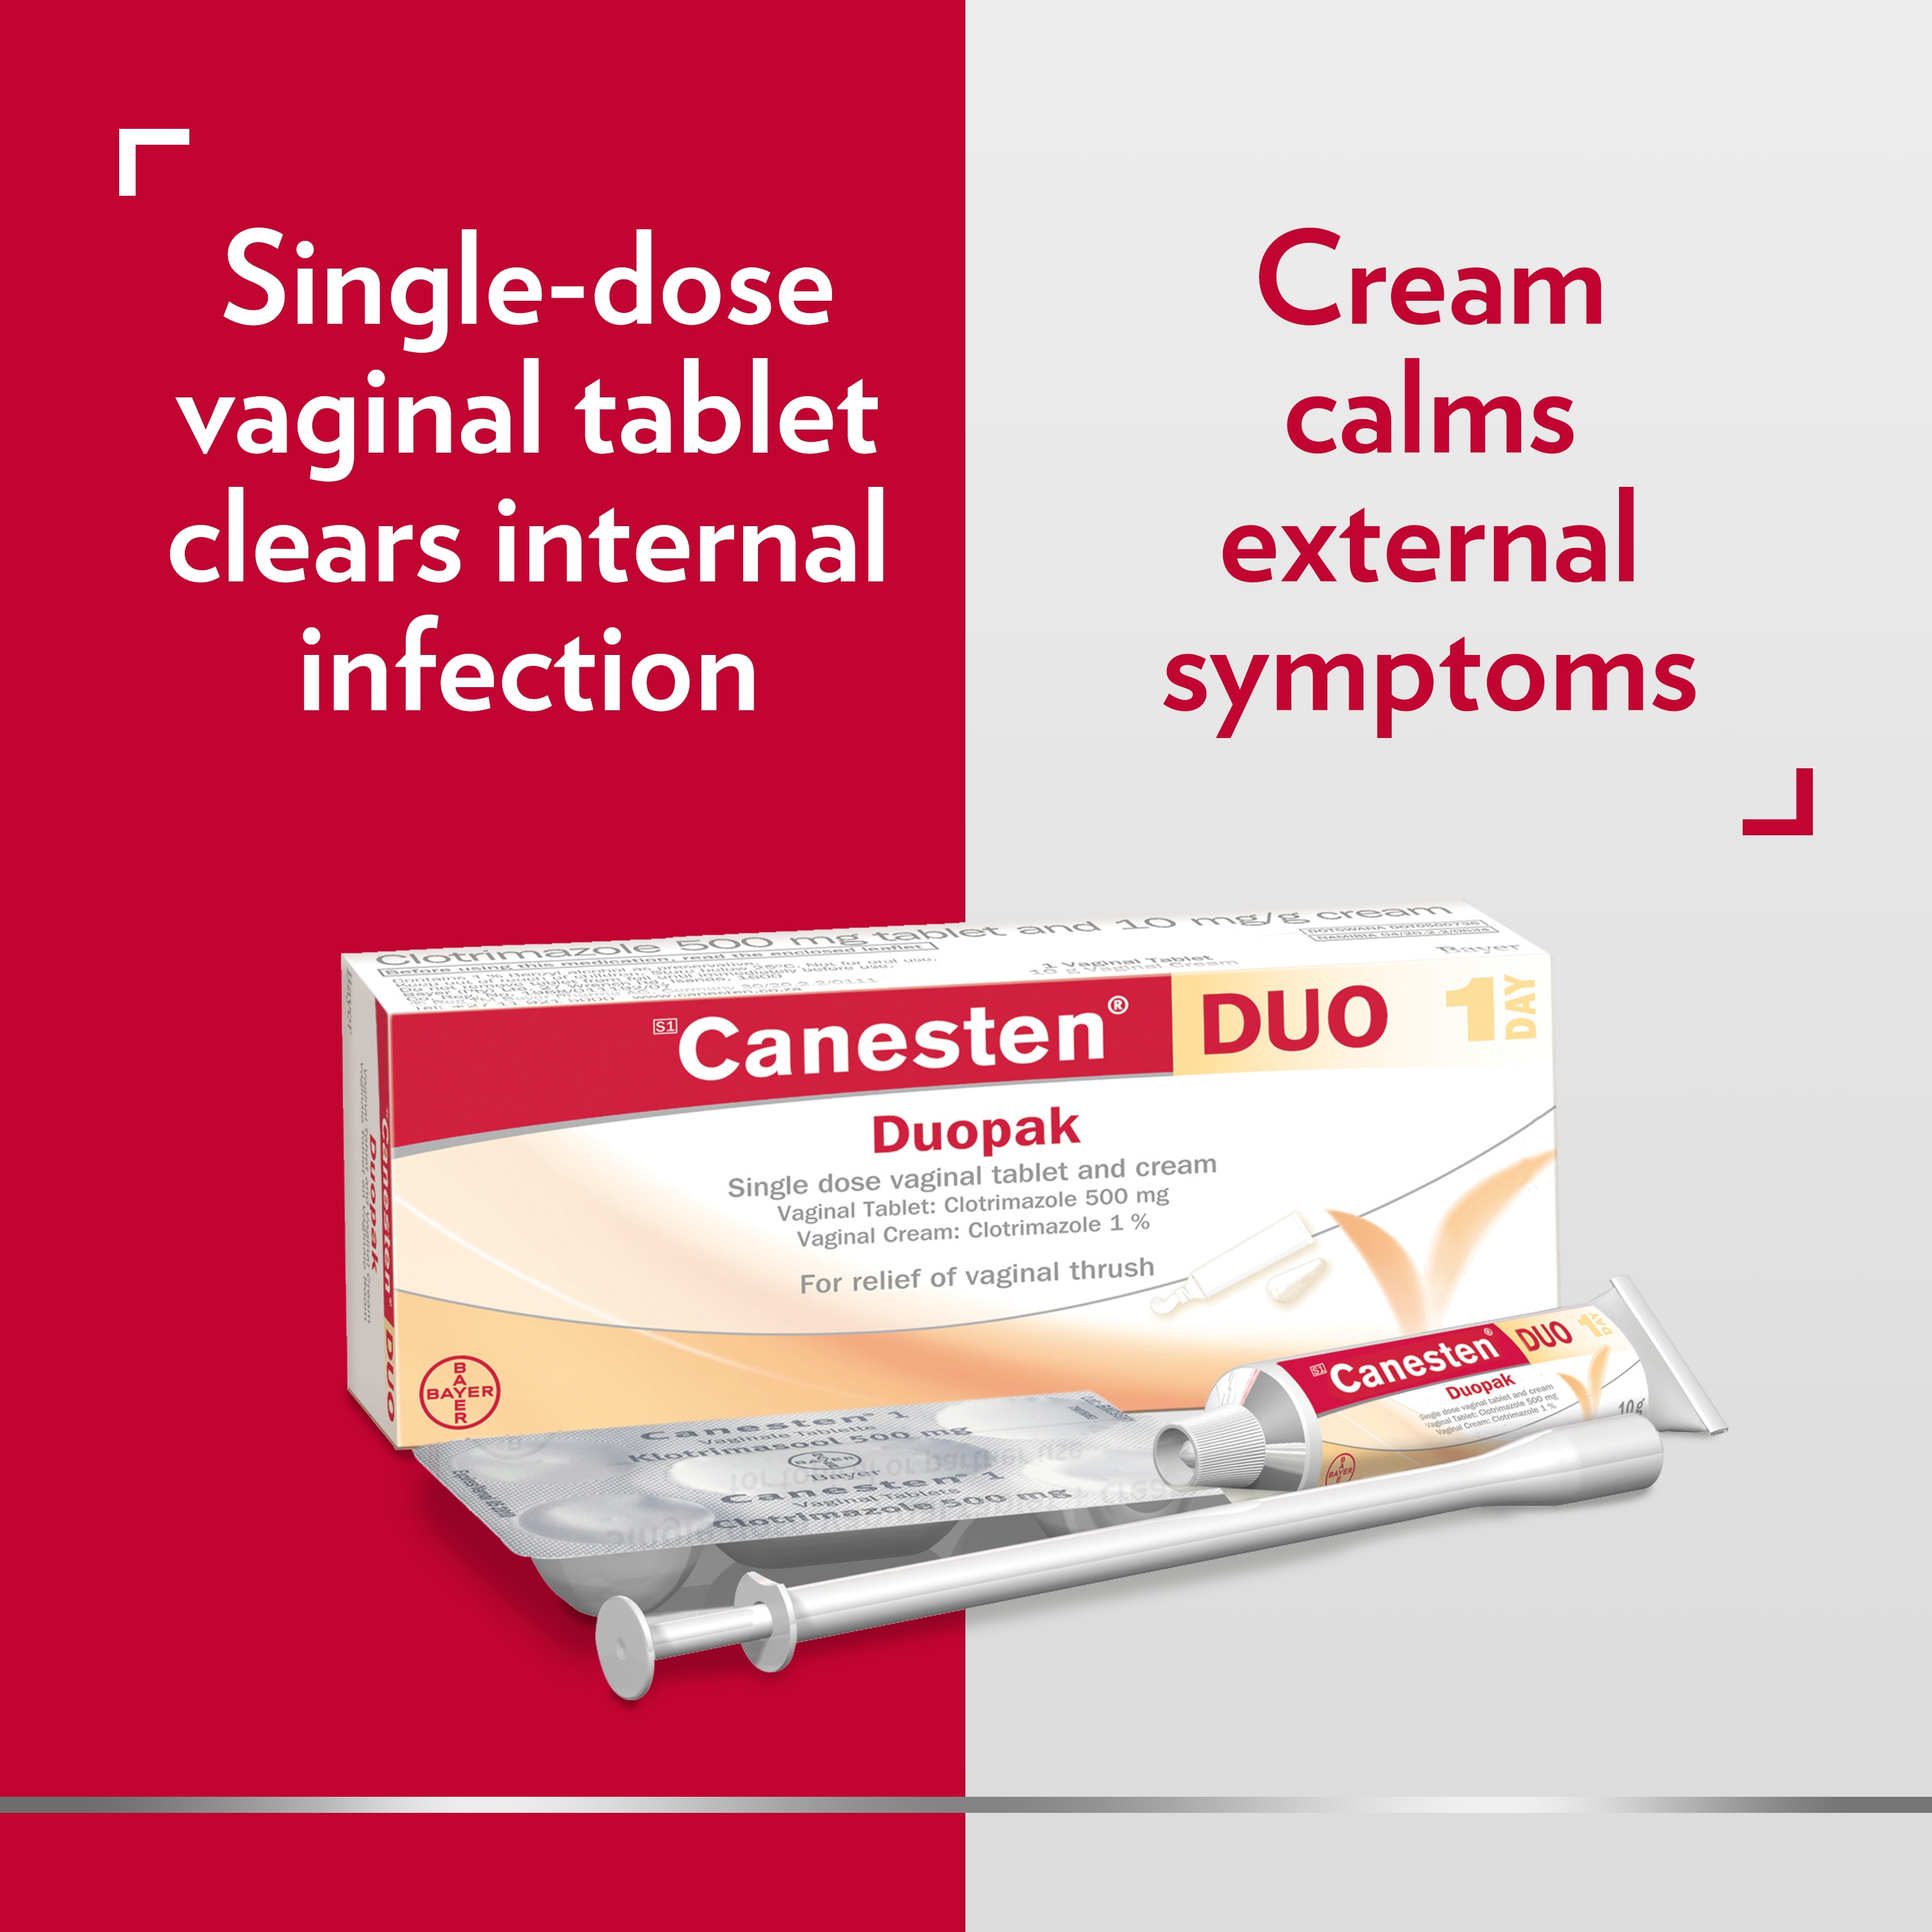 Canesten Thrush Combi Vaginal Tablet and External Cream with double caption: Left side: Single-dose vaginal tablet clears internal infection, right side: Cream calms external symptoms